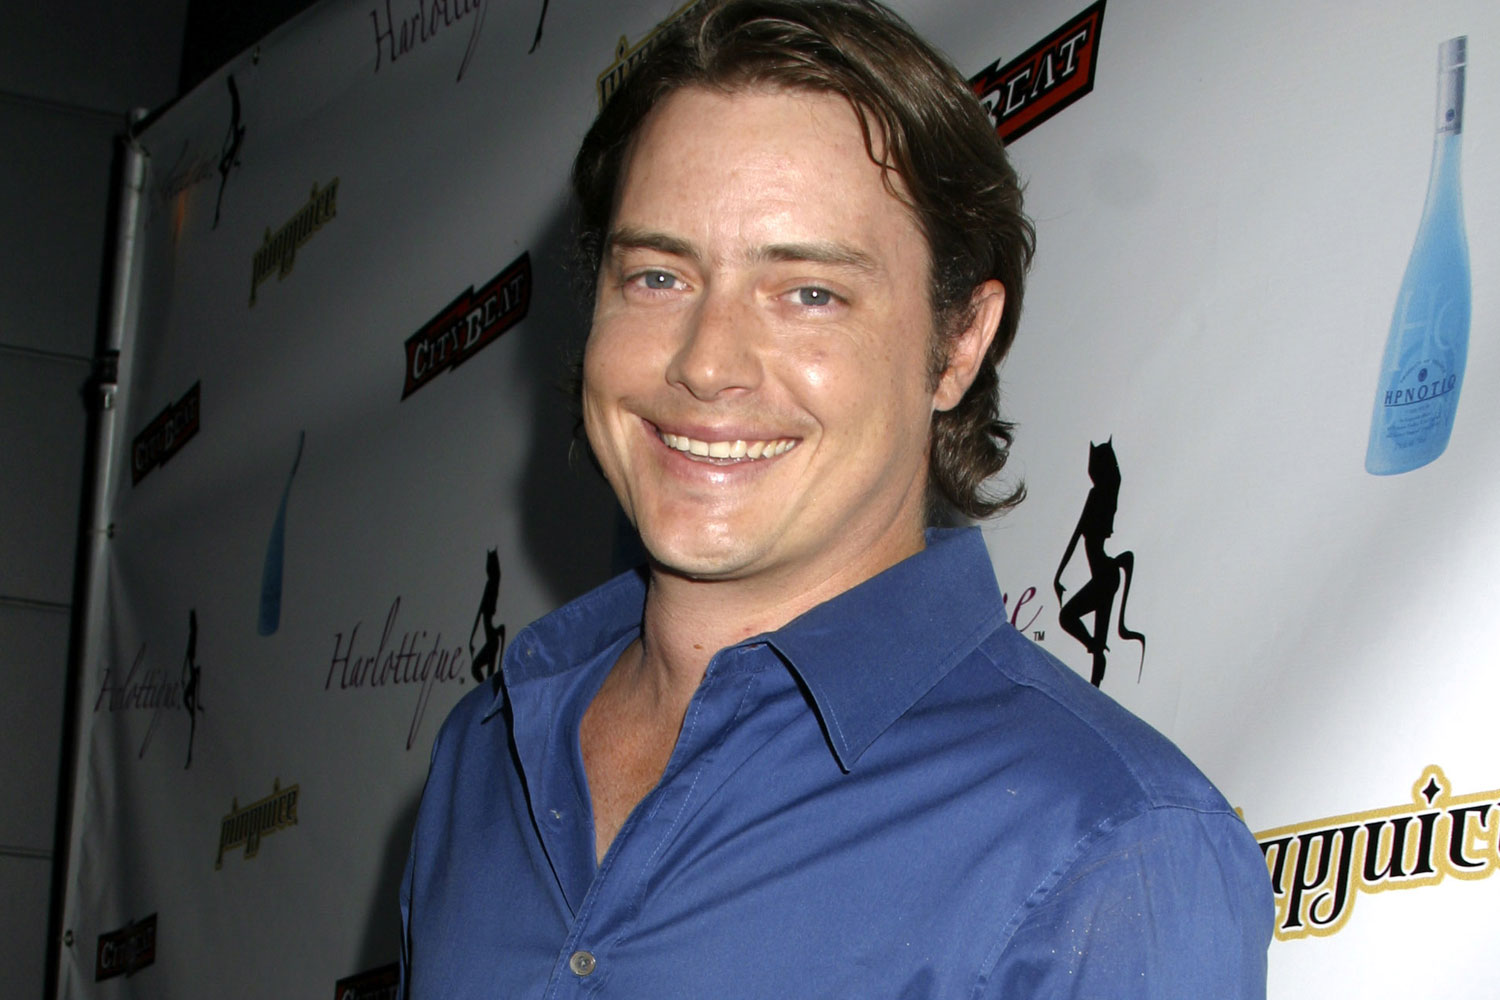 7th heaven actor Jeremy London arrested for alleged domestic violence | WHO Magazine1500 x 1000